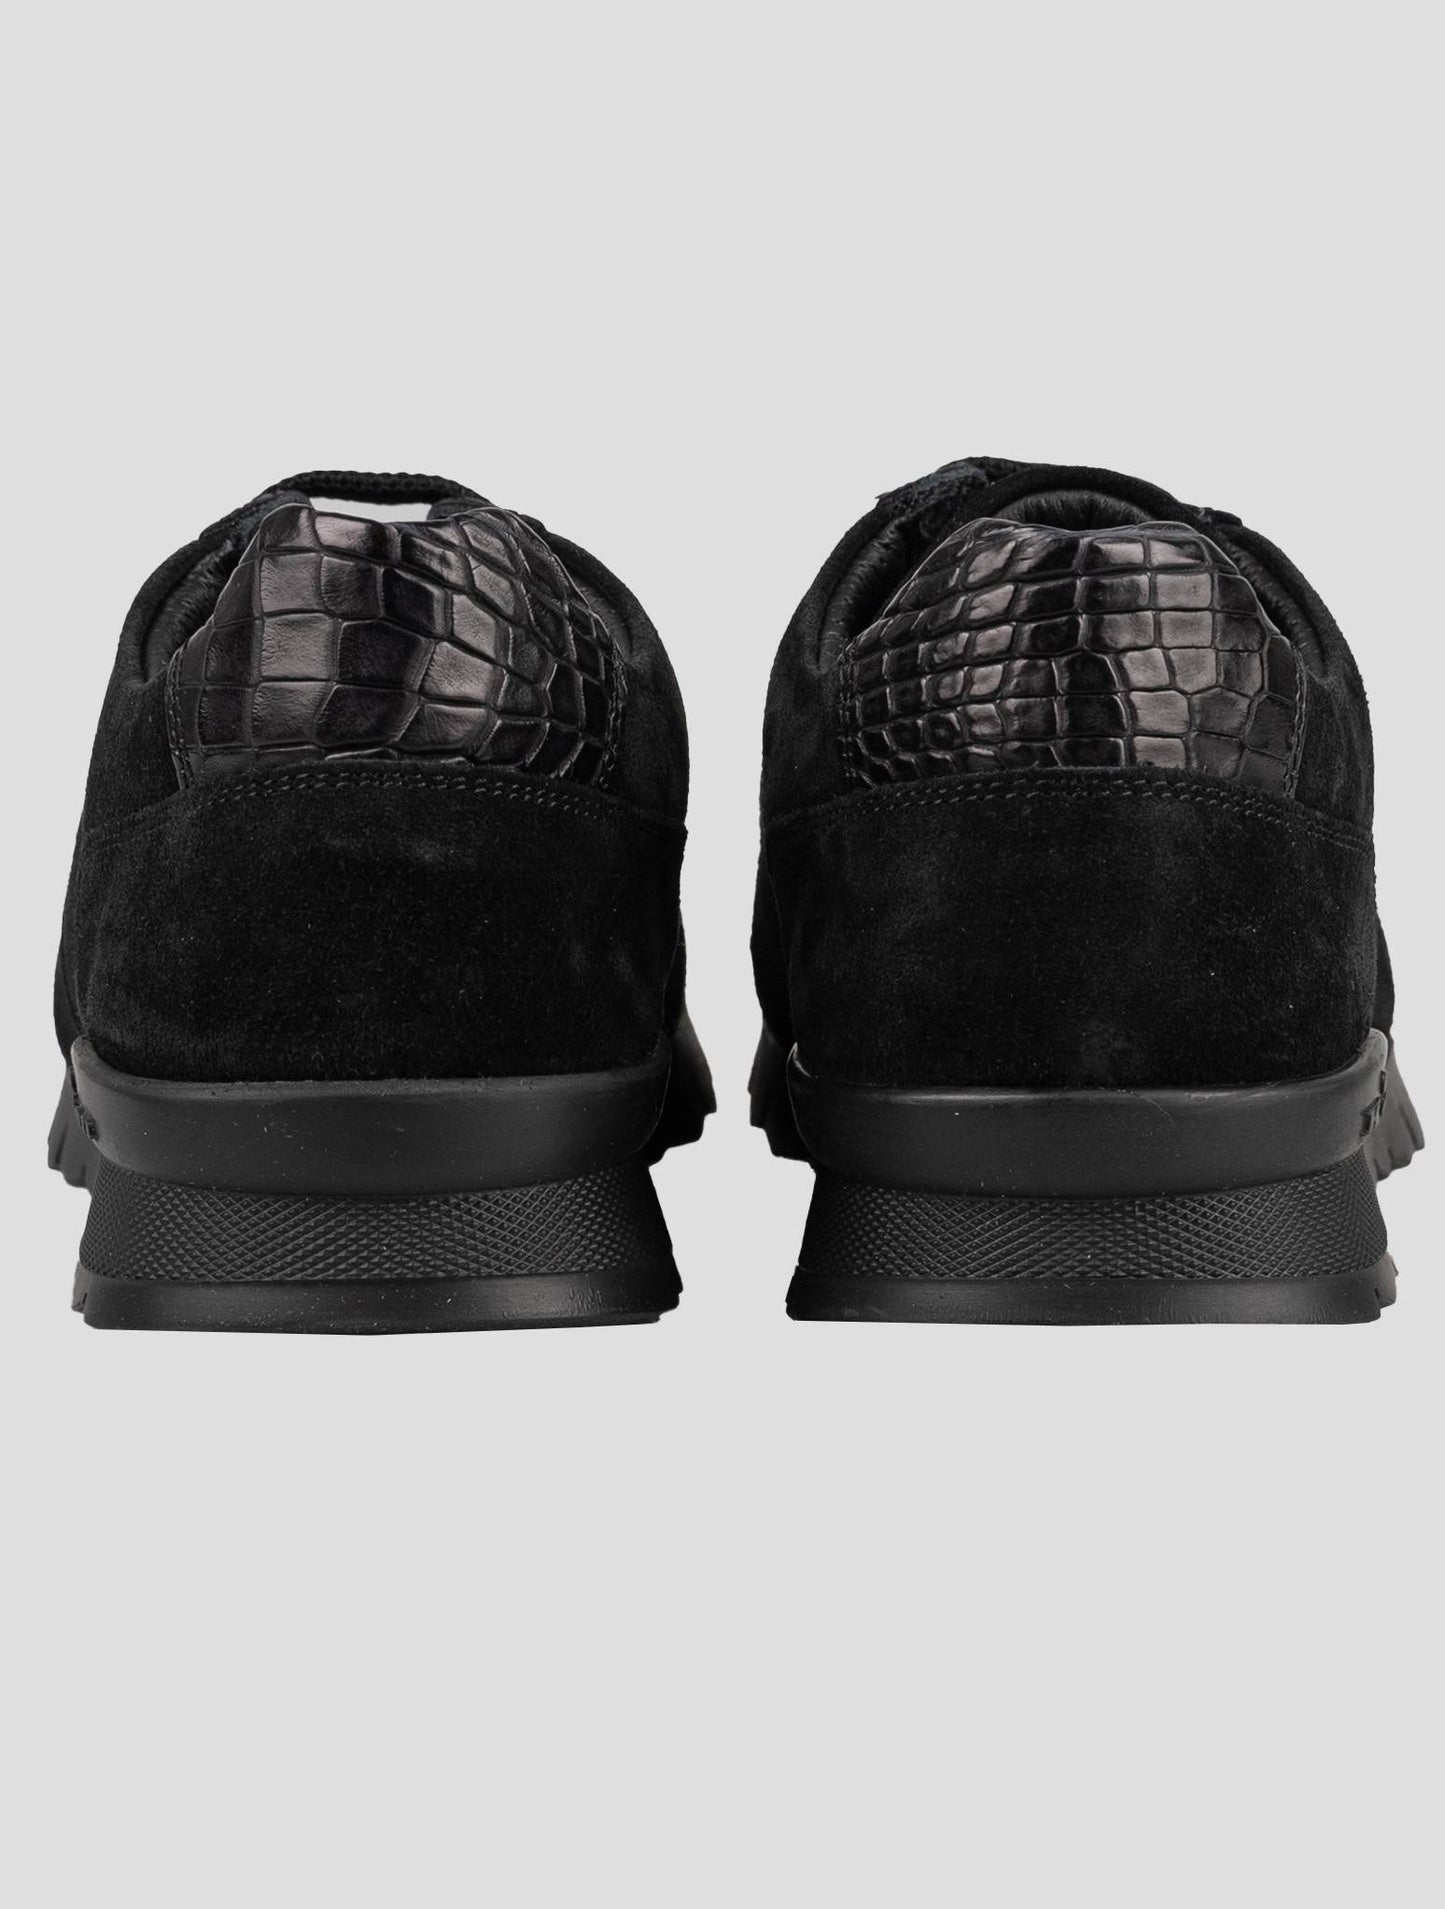 Kiton Black Leather Crocodile Leather Suede Sneakers